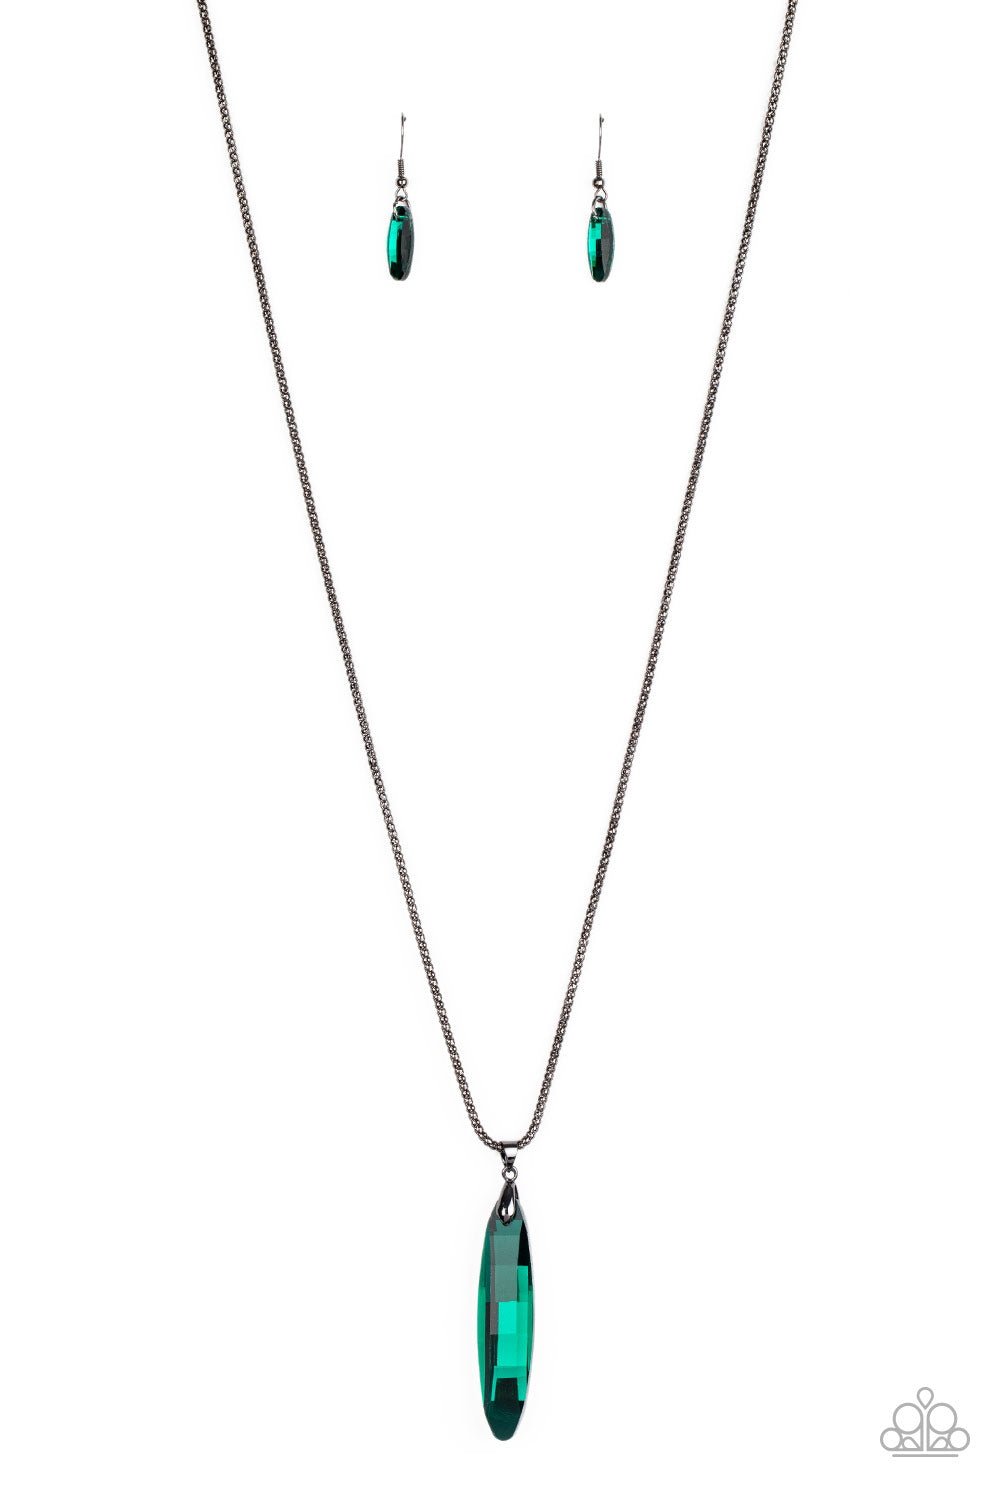 Meteor Shower - Green Necklace - Paparazzi Accessories